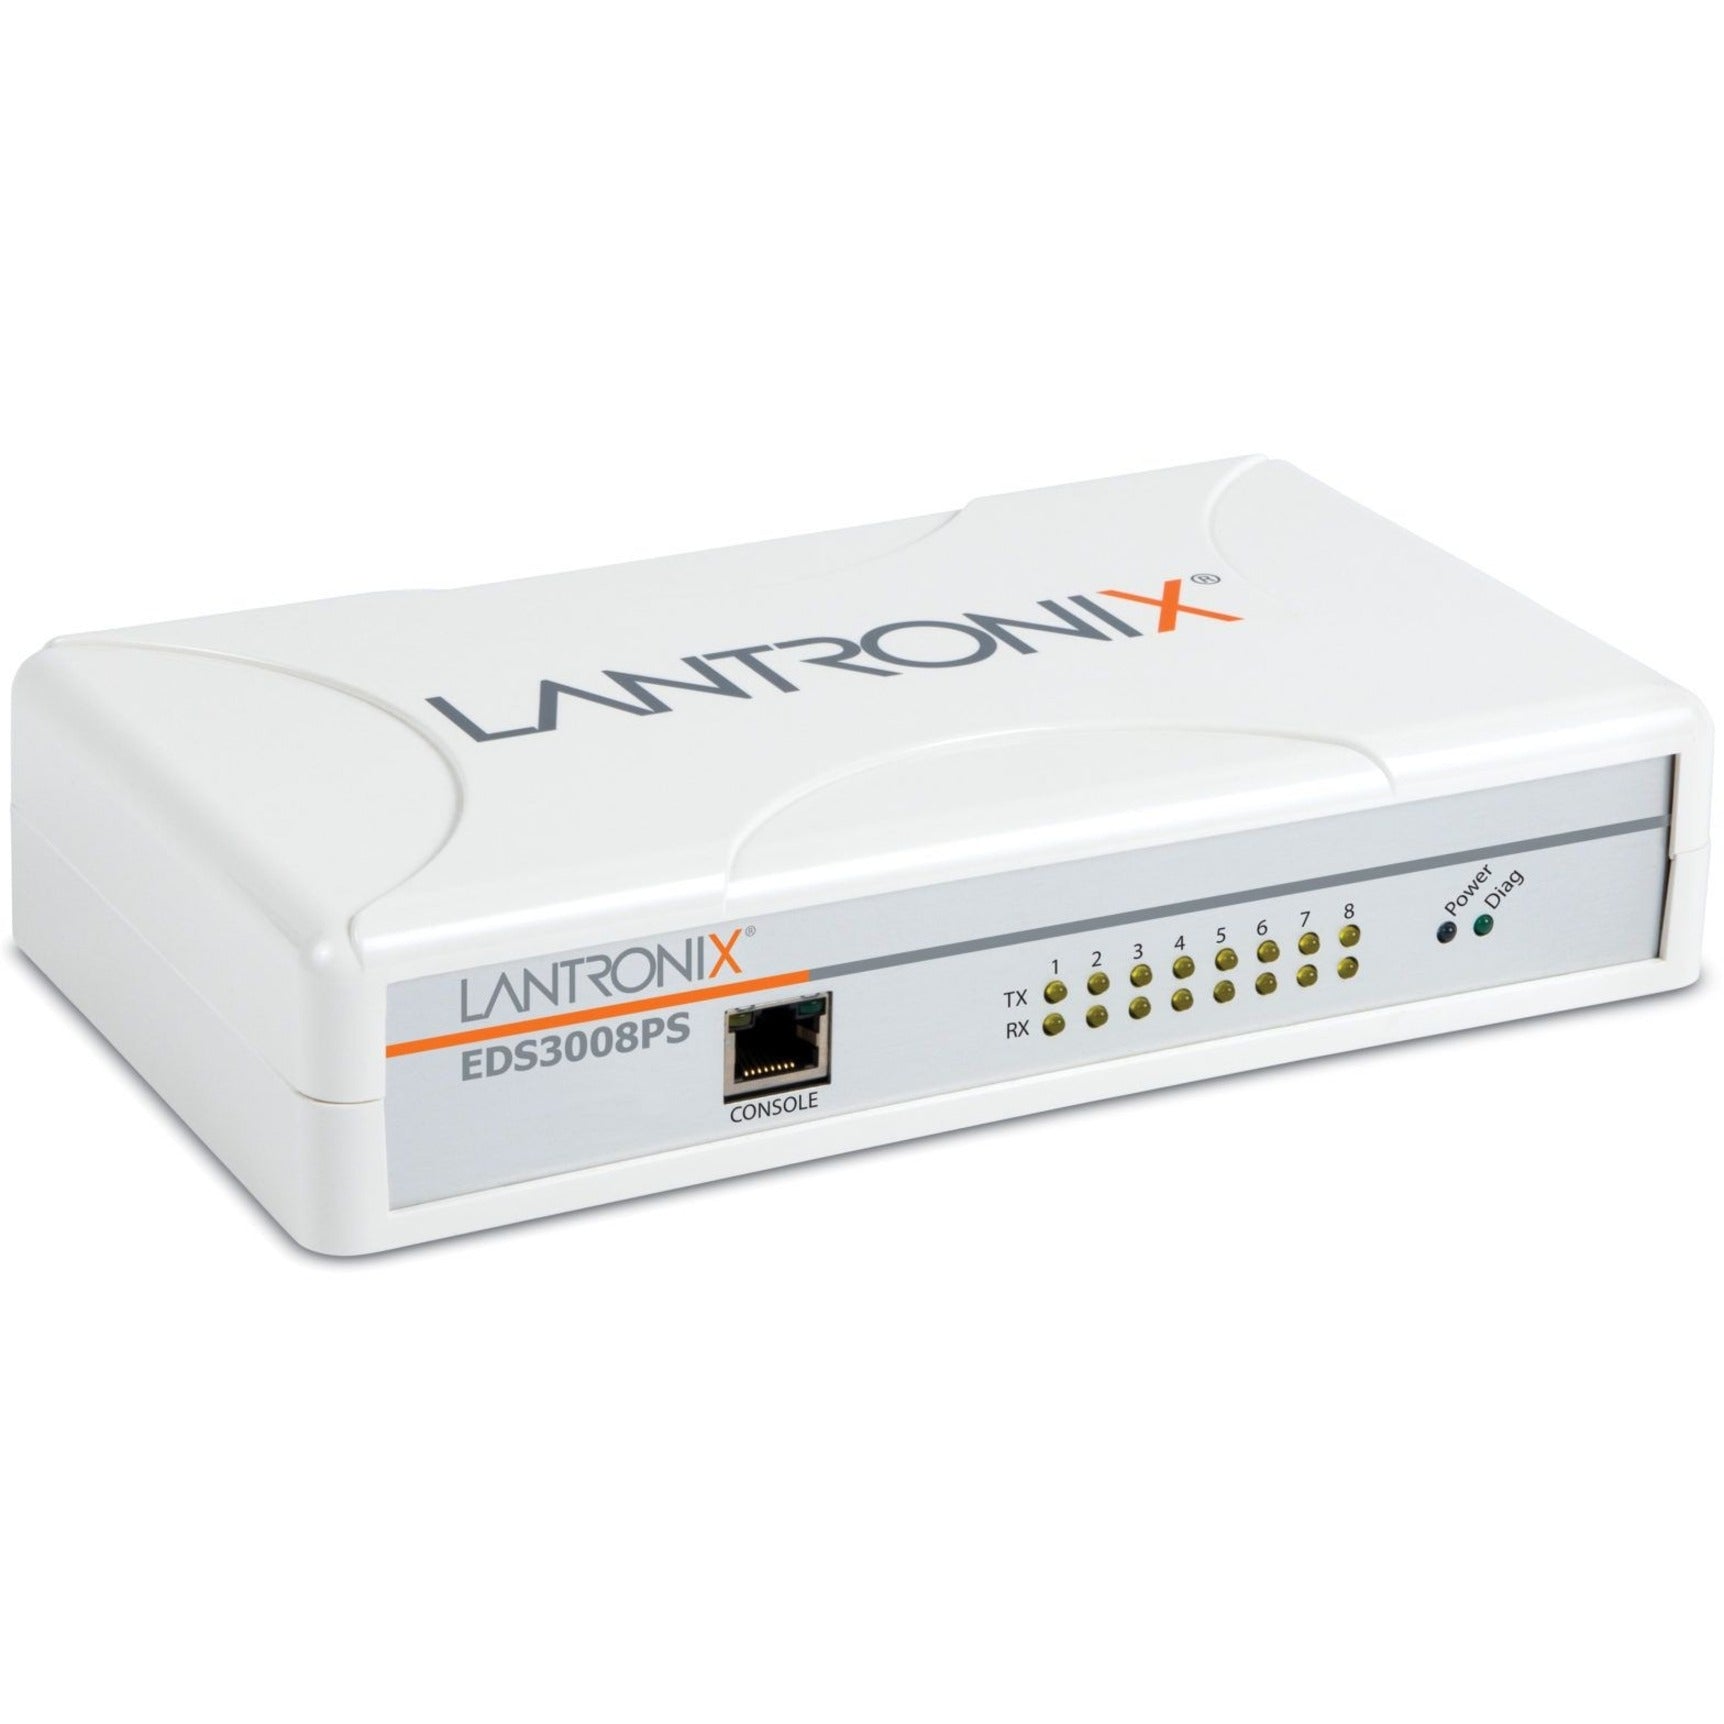 Lantronix EDS3008PS1NS EDS EDS3008PS Device Server, 8 Serial Ports, Gigabit Ethernet, 512MB Memory, 2 Year Warranty